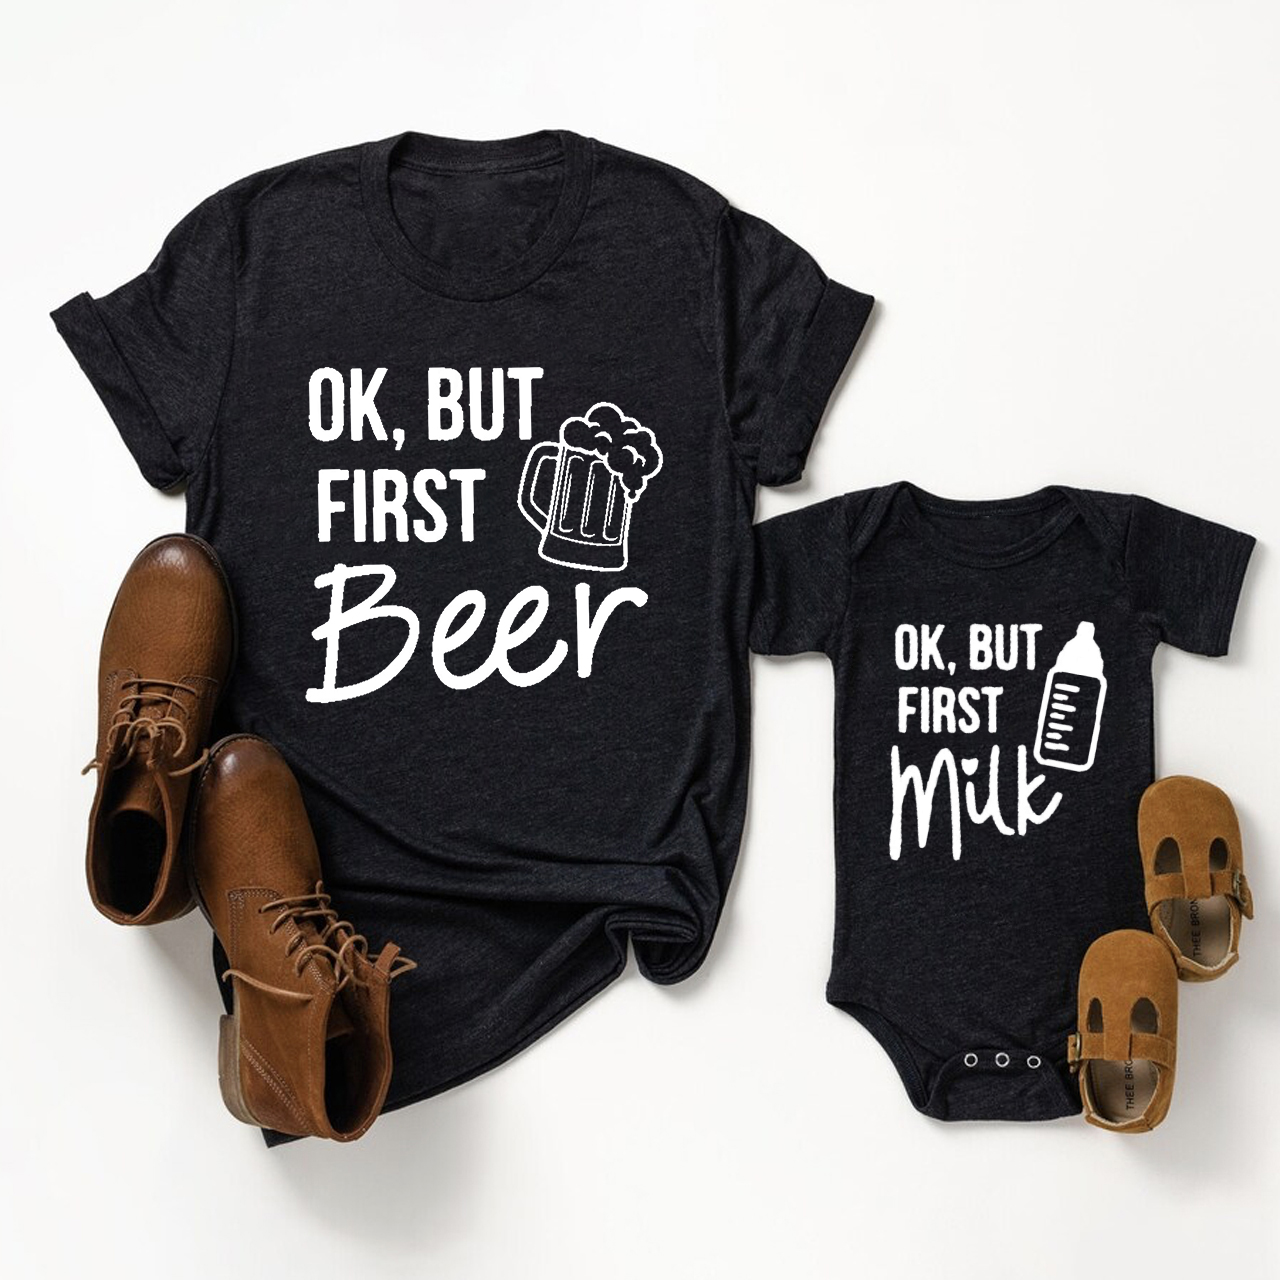 OK But First Beer & Milk Matching Father's Day Shirt